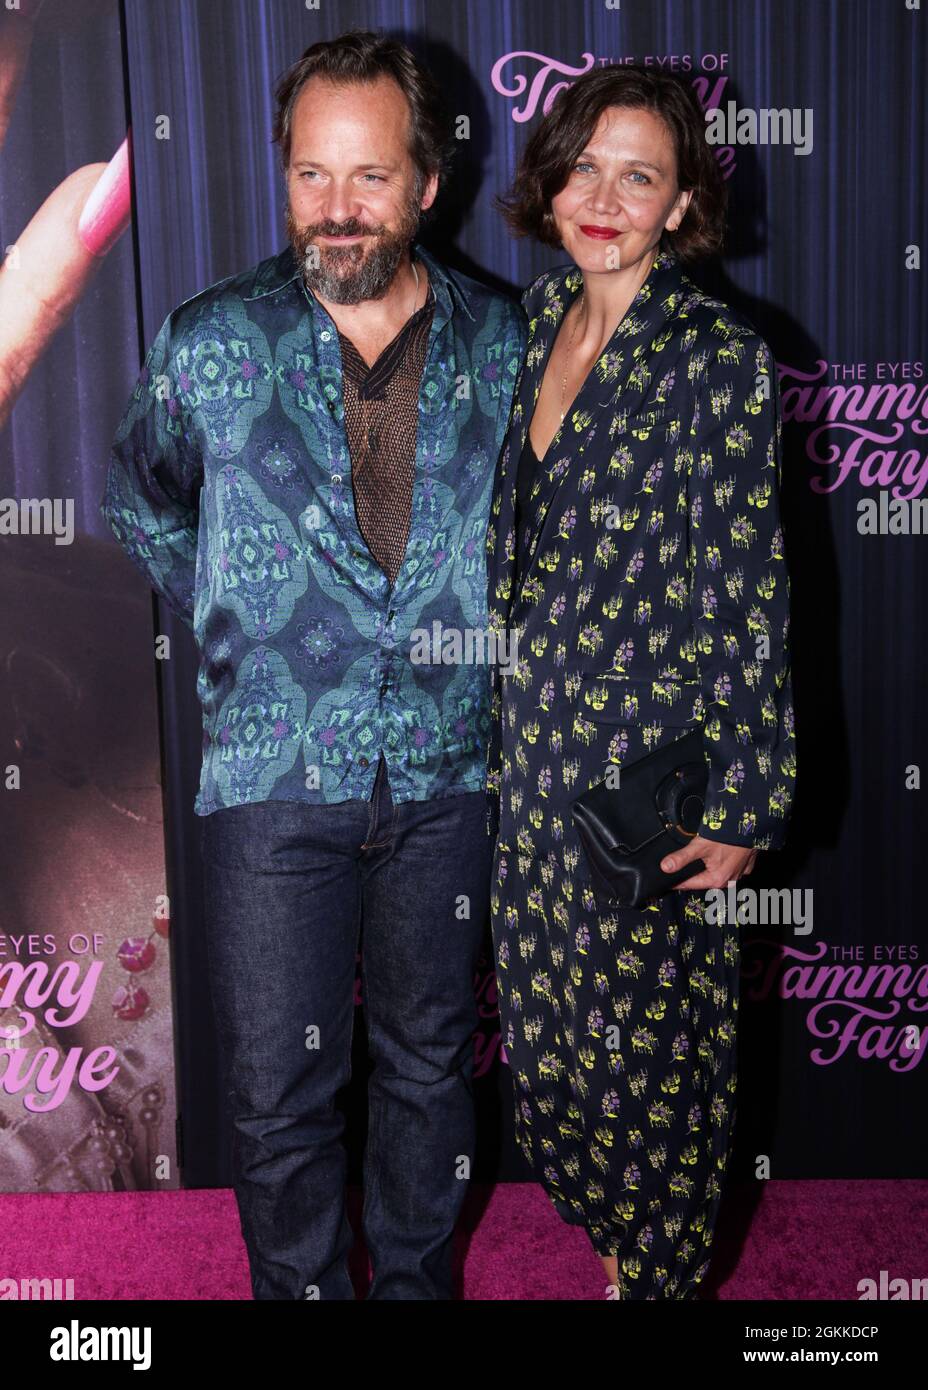 New York City, United States. 14th Sep, 2021. MANHATTAN, NEW YORK CITY, NEW YORK, USA - SEPTEMBER 14: Peter Sarsgaard and wife/actress Maggie Gyllenhaal arrive at the New York Premiere Of Fox Searchlight Pictures' 'The Eyes Of Tammy Faye' held at the SVA Theater on September 14, 2021 in Manhattan, New York City, New York, United States. (Photo by Kevin Lian/Image Press Agency) Credit: Image Press Agency/Alamy Live News Stock Photo